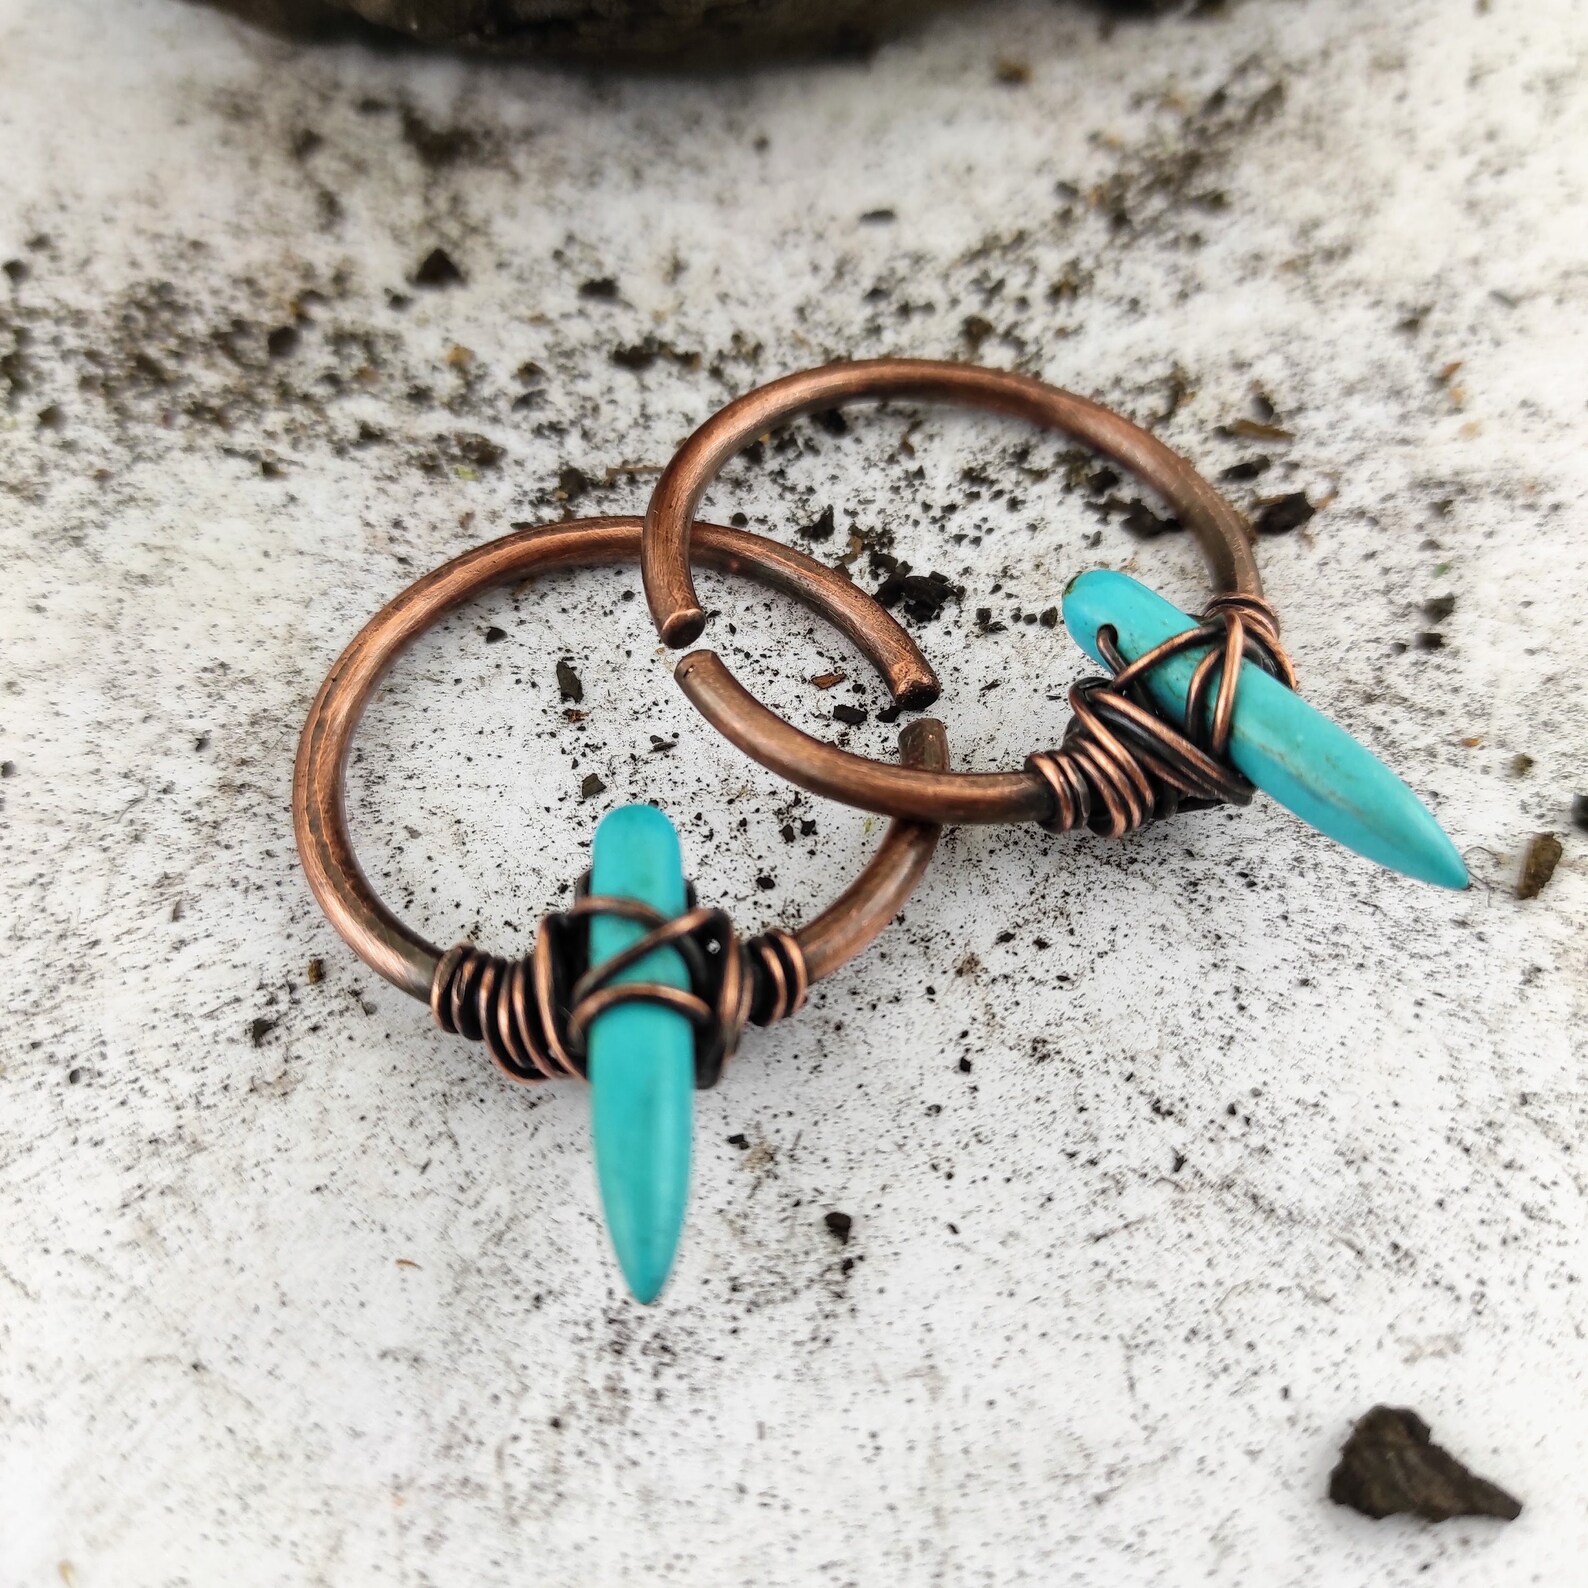 10g Ear Weights Turquoise Stone Tunnel Earrings